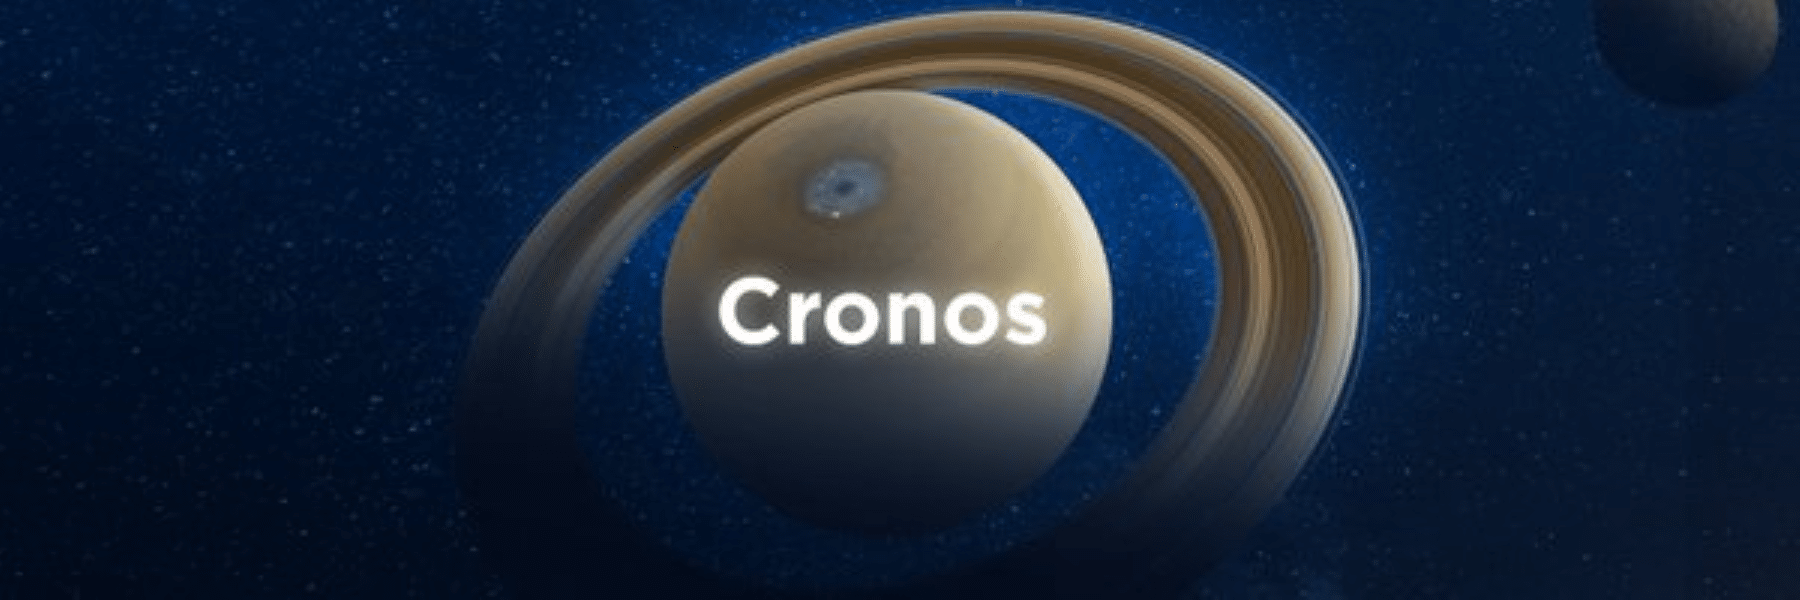 Top Crypto Gainers Today Apr 12 – Cronos, Conflux, Oasis Network, BitTorrent